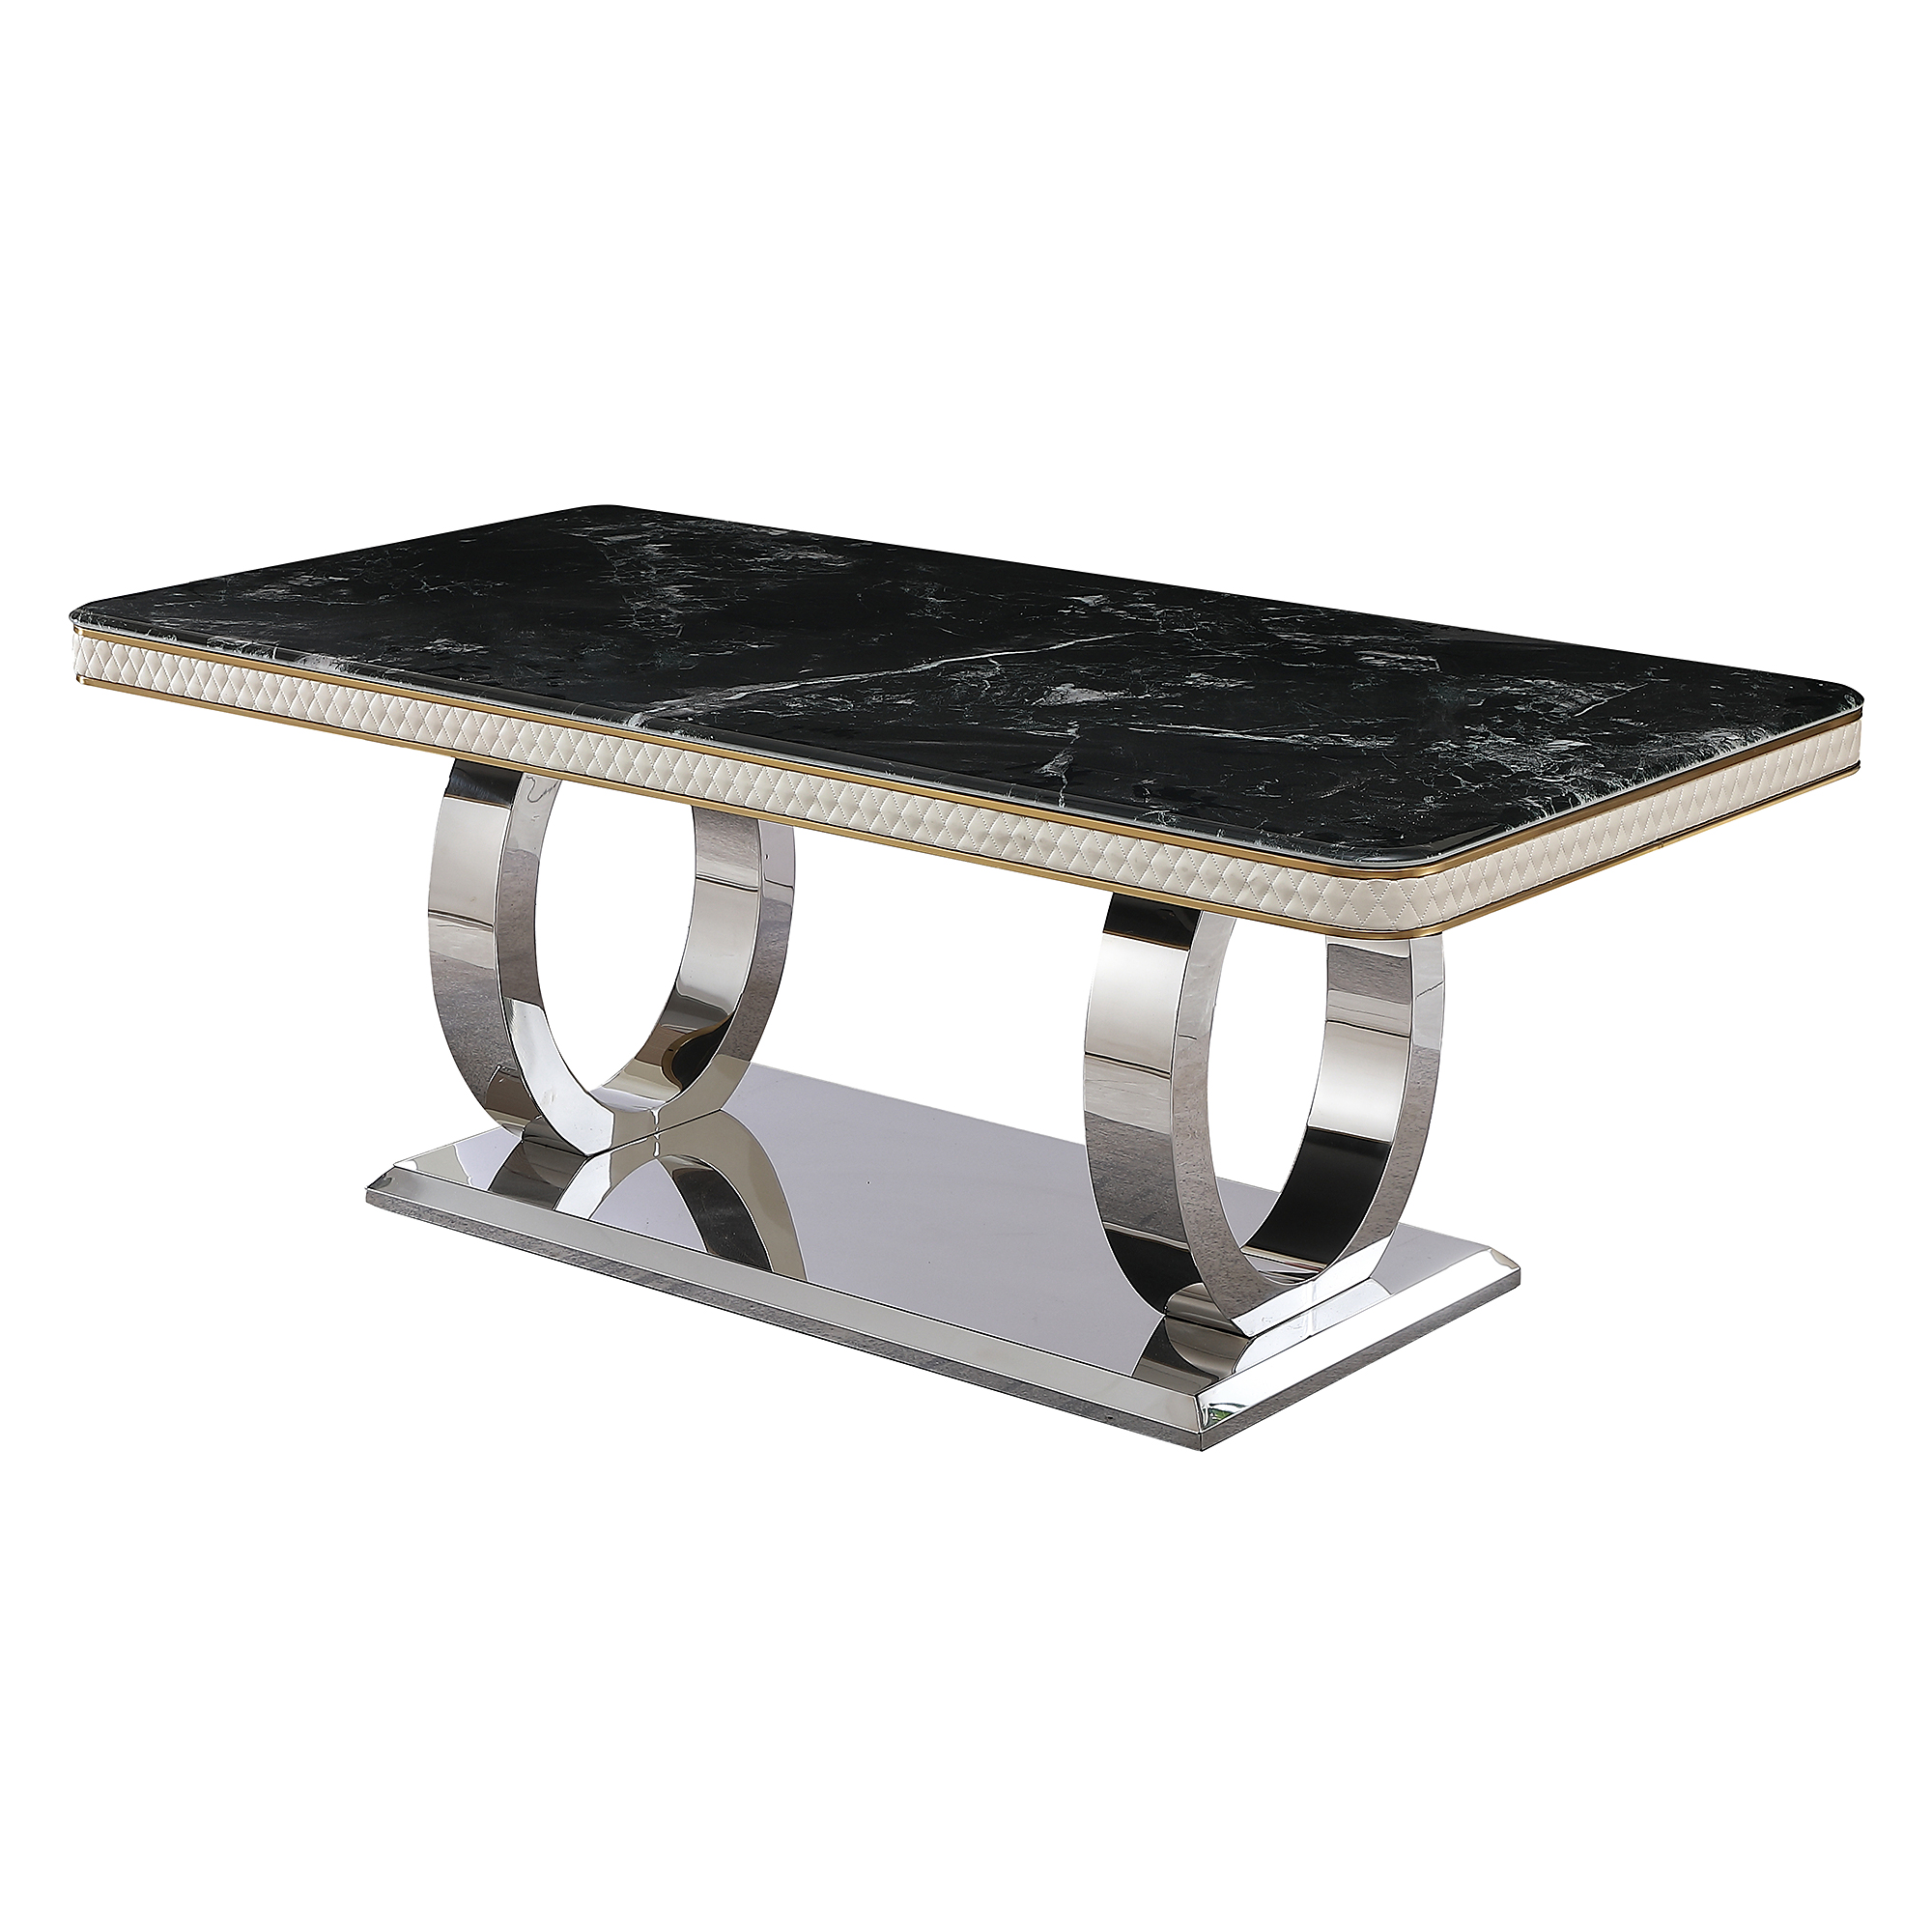 Montary 78.7" Black Luxury Modern Dining Table